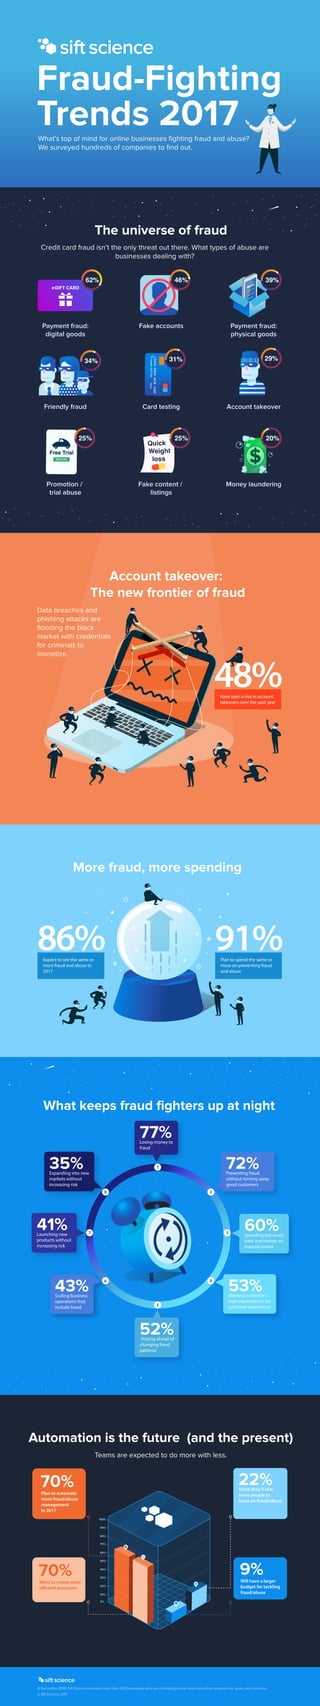 The universe of fraud
More fraud, more spending
Credit card fraud isn’t the only threat out there. What types of abuse are
businesses dealing with?
Payment fraud:
digital goods
Fake accounts Payment fraud:
physical goods
Friendly fraud Card testing
Money laundering
Account takeover
Promotion /
trial abuse
Fake content /
listings
46%
29%
5014555540151245
HARRYPOTTER13/15
31%
39%
eGIFT CARD
62%
20%25%
Free Trial
Start now
34%
25%
Quick
Weight
loss
Account takeover:
The new frontier of fraud
What’s top of mind for online businesses ﬁghting fraud and abuse?
We surveyed hundreds of companies to ﬁnd out.
Data breaches and
phishing attacks are
ﬂooding the black
market with credentials
for criminals to
monetize.
48%Have seen a rise in account
takeovers over the past year
86%Expect to see the same or
more fraud and abuse in
2017
91%Plan to spend the same or
more on preventing fraud
and abuse
Automation is the future (and the present)
In December 2016, Sift Science surveyed more than 200 businesses who are combating online fraud about their experiences, goals, and concerns.
© Sift Science 2017
Teams are expected to do more with less.
72%
60%
53%
35%
41% Spending too much
time and money on
manual review
Meeting customers’high
expectations for custom-
er experience
Expanding into new
markets without
increasing risk
Launching new
products without
increasing risk
1
2
3
4
5
6
7
8
Fraud-Fighting
Trends 2017
What keeps fraud ﬁghters up at night
60%Spending too much
time and money on
manual review
60%Spending too much
time and money on
manual review
41%Launching new
products without
increasing risk
53%Meeting customers’
high expectations for
customer experience
43%Scaling business
operations that
include fraud
72%Preventing fraud
without turning away
good customers
35%Expanding into new
markets without
increasing risk
1
2
3
4
5
6
7
8
77%Losing money to
fraud
52%Staying ahead of
changing fraud
patterns
9%Will have a larger
budget for tackling
fraud/abuse
70%Want to create more
efficient processes
70%Plan to automate
more fraud/abuse
management
in 2017
22%Think they’ll hire
more people to
focus on fraud/abuse
100%
90%
80%
70%
60%
50%
40%
30%
20%
10%
0%
 